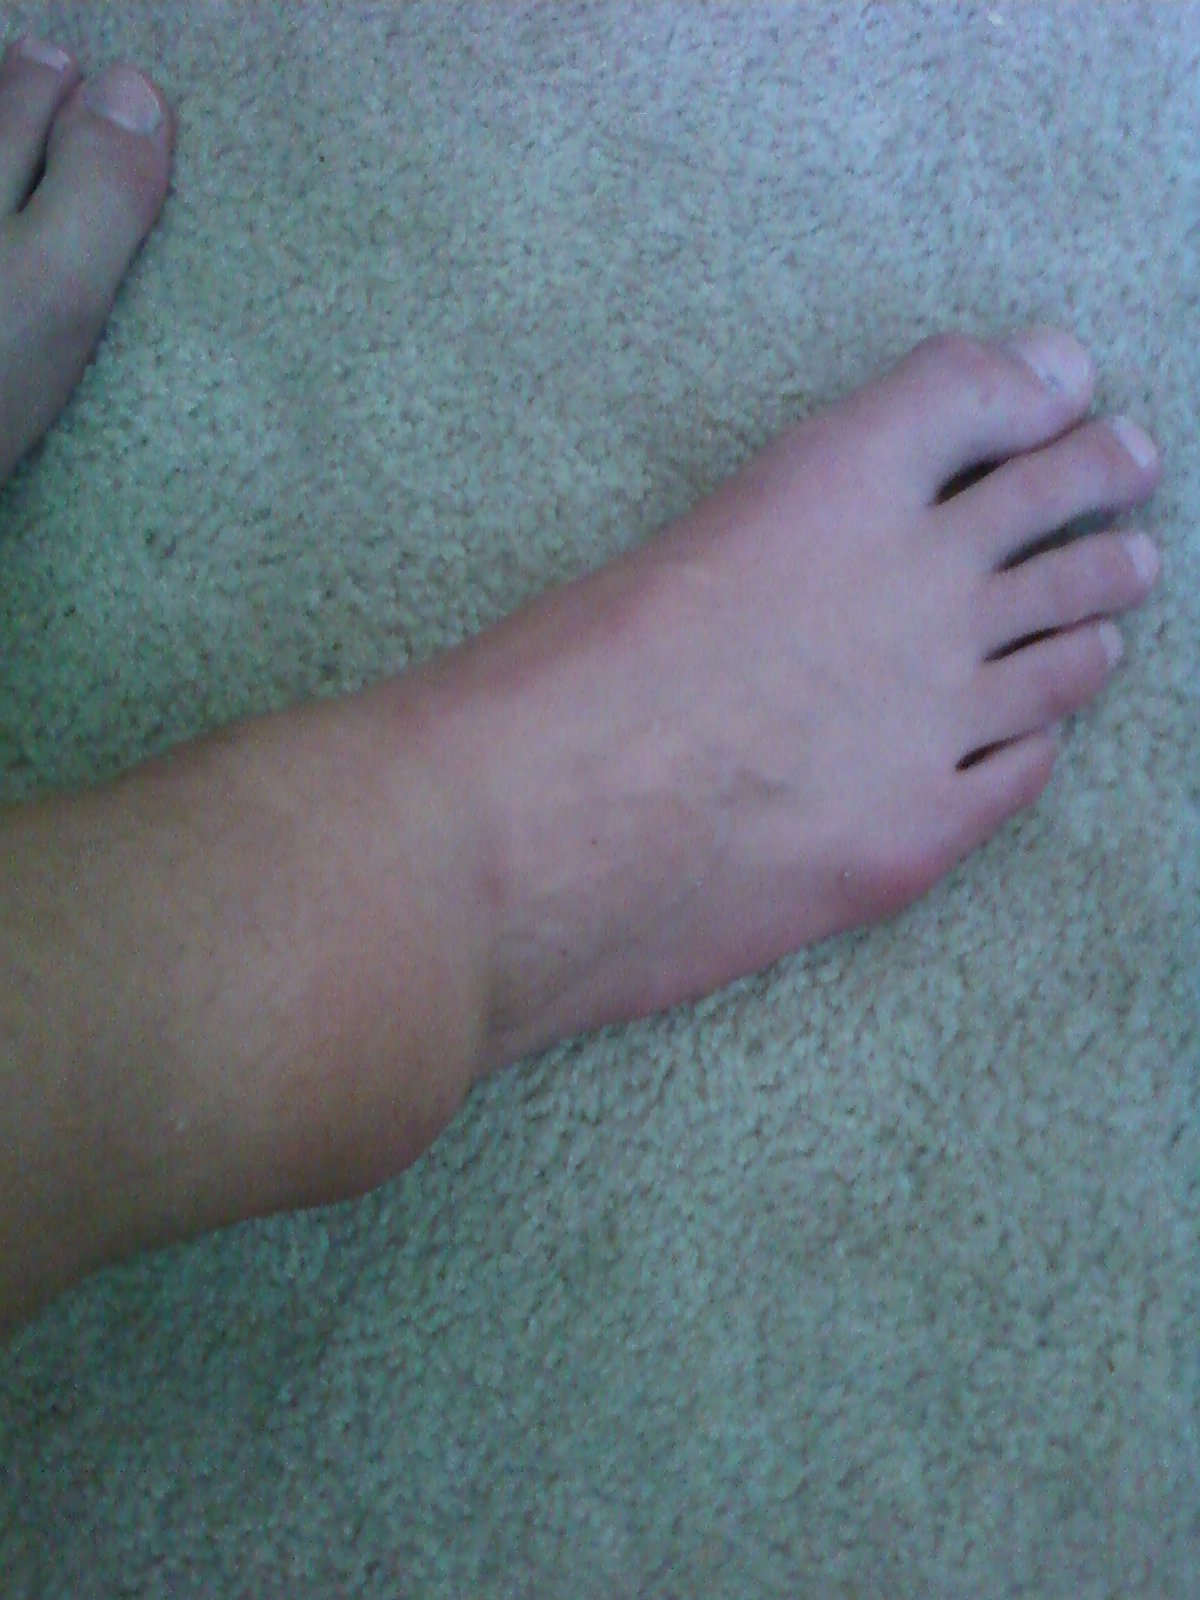 My ankle